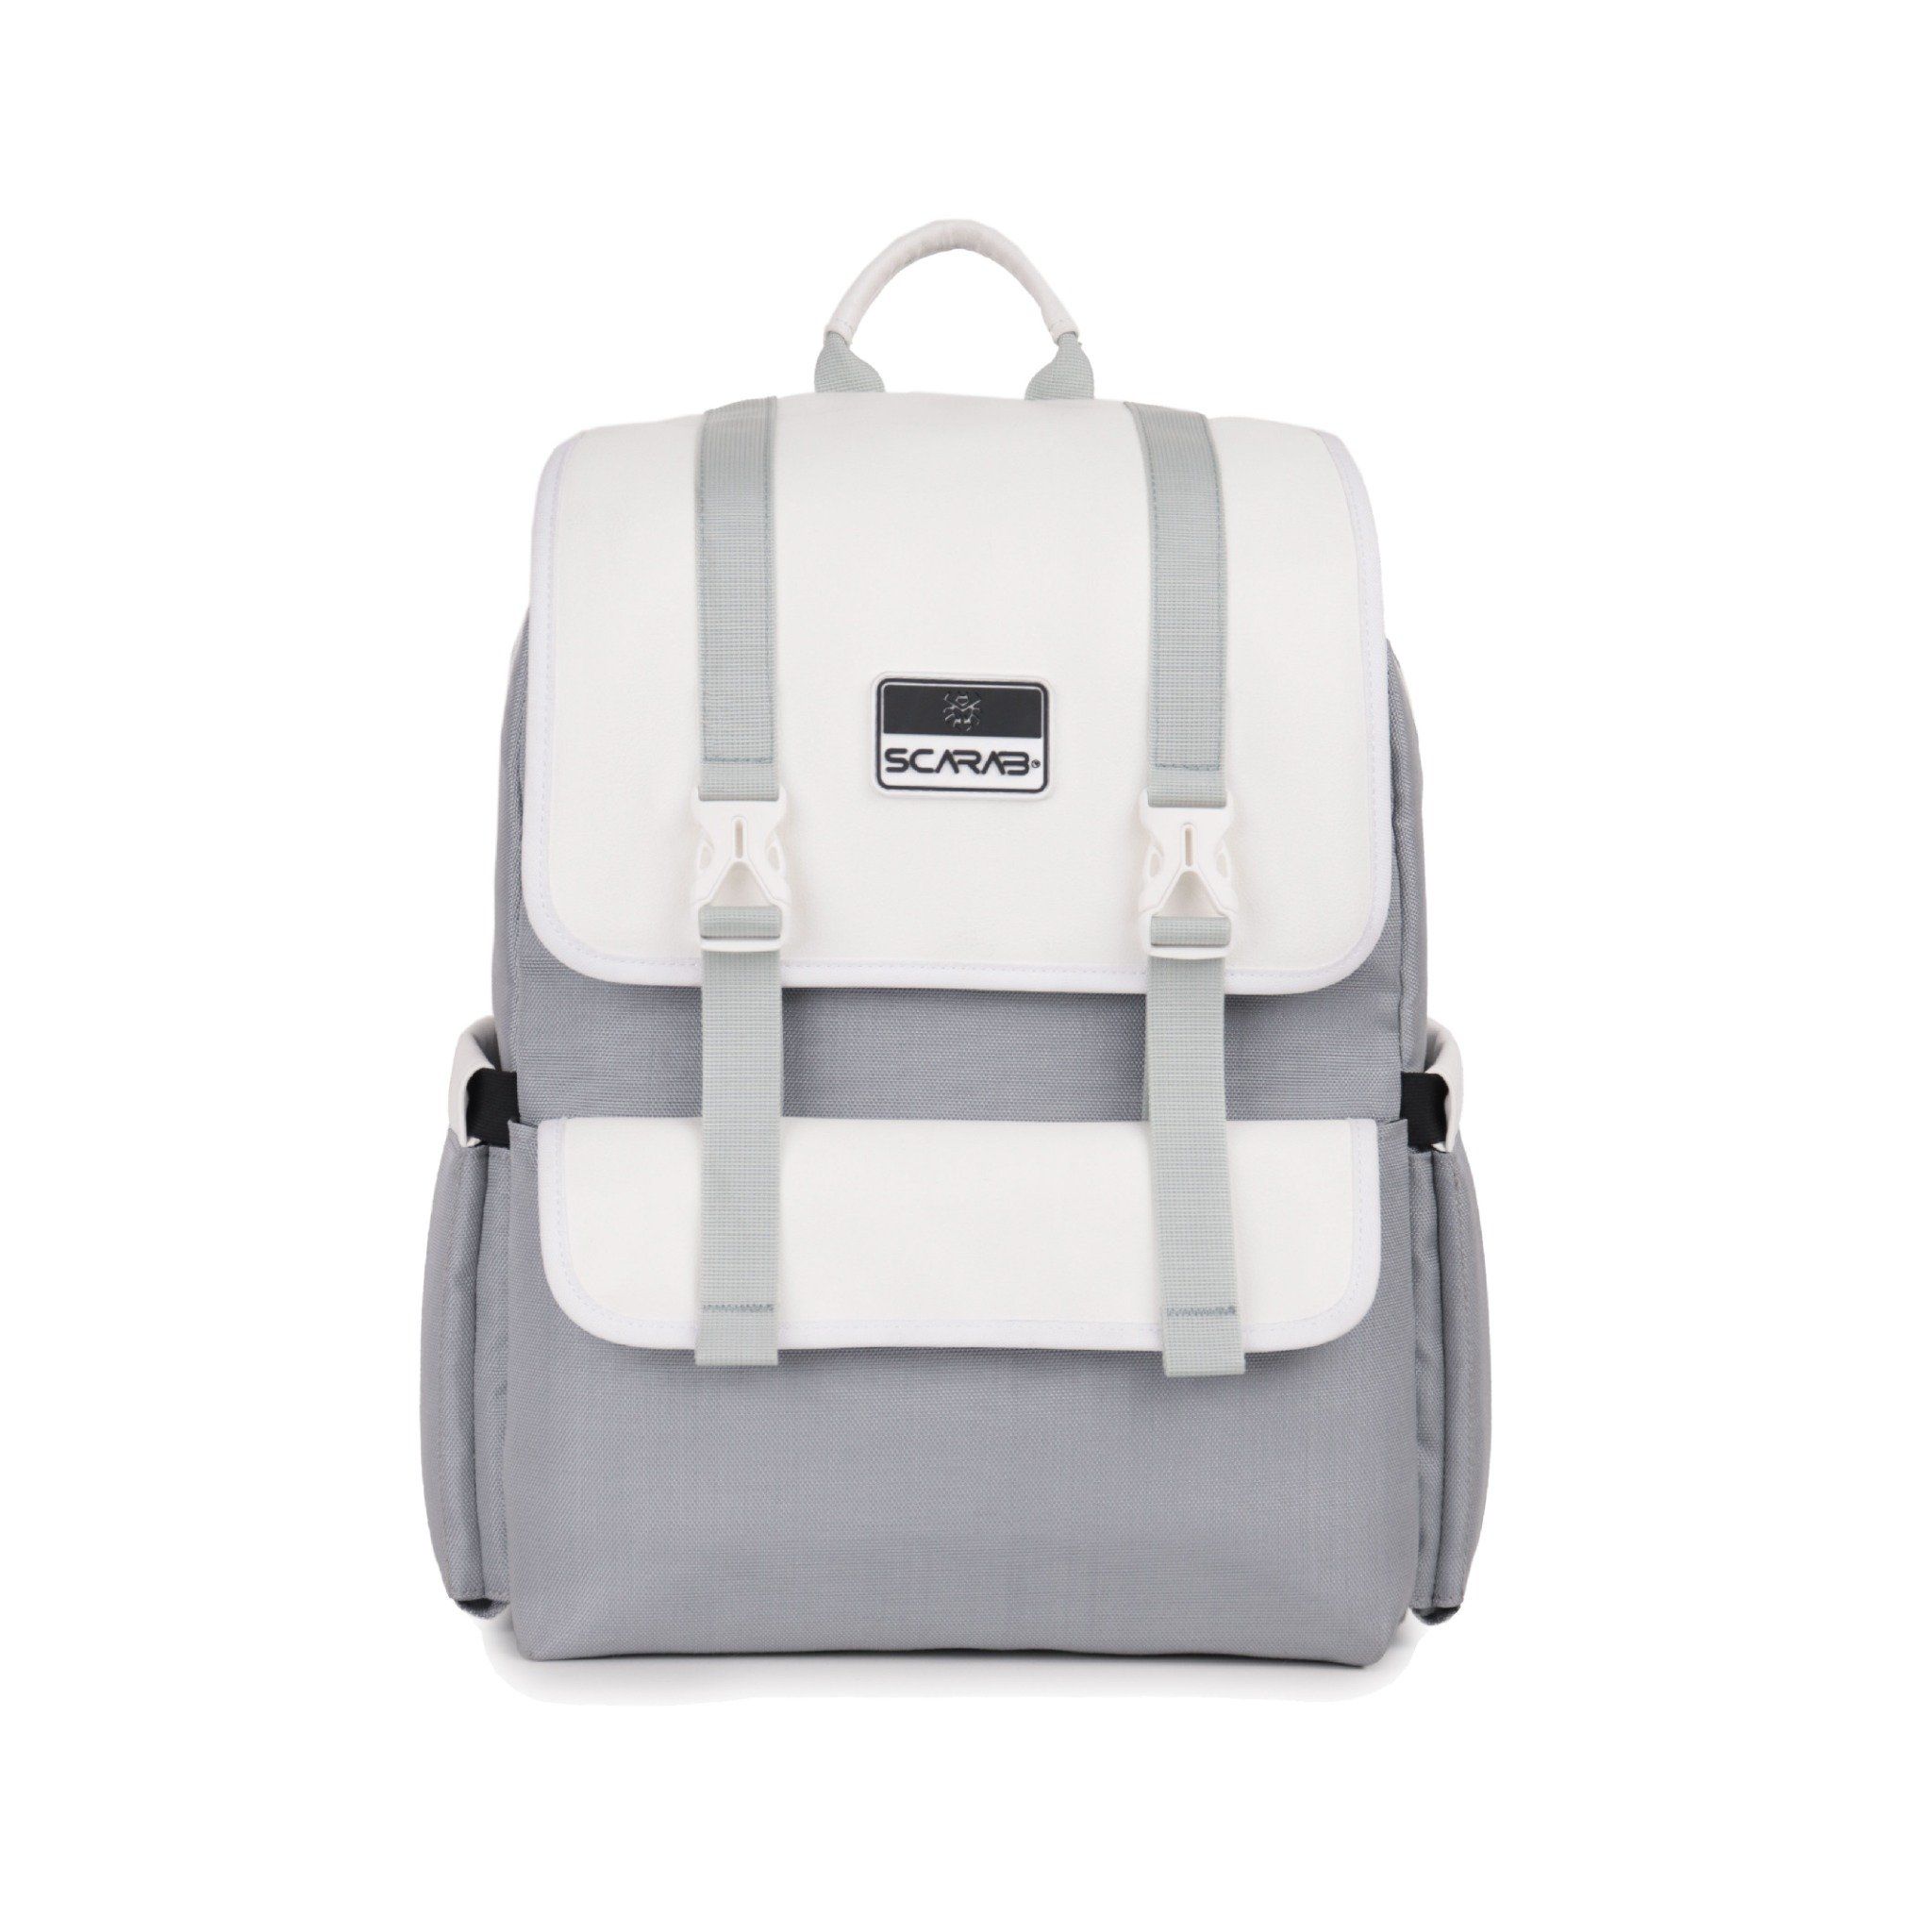  Passion Backpack - Grey 